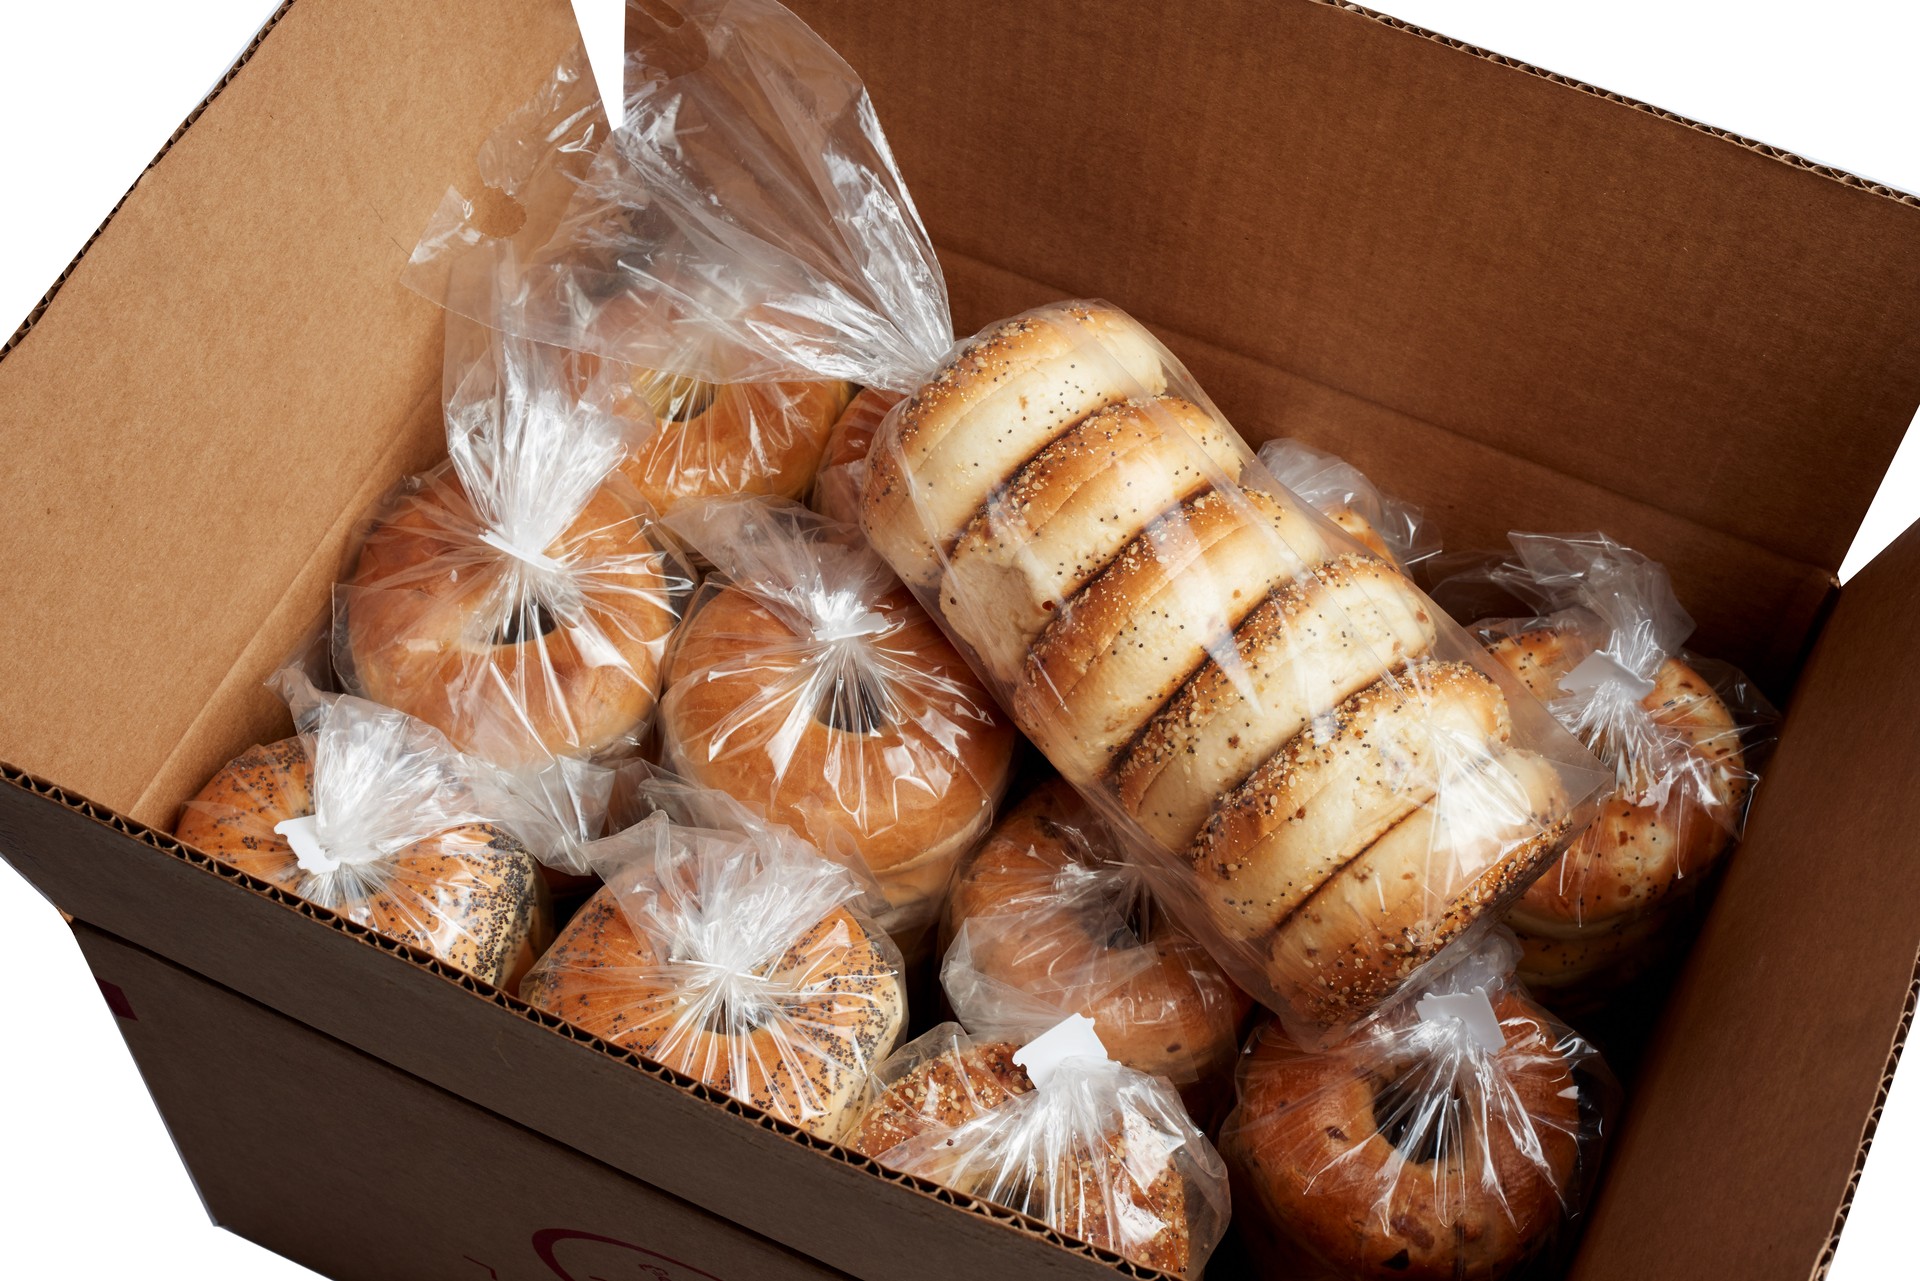 Bagels in a clear bags in a box for shipping